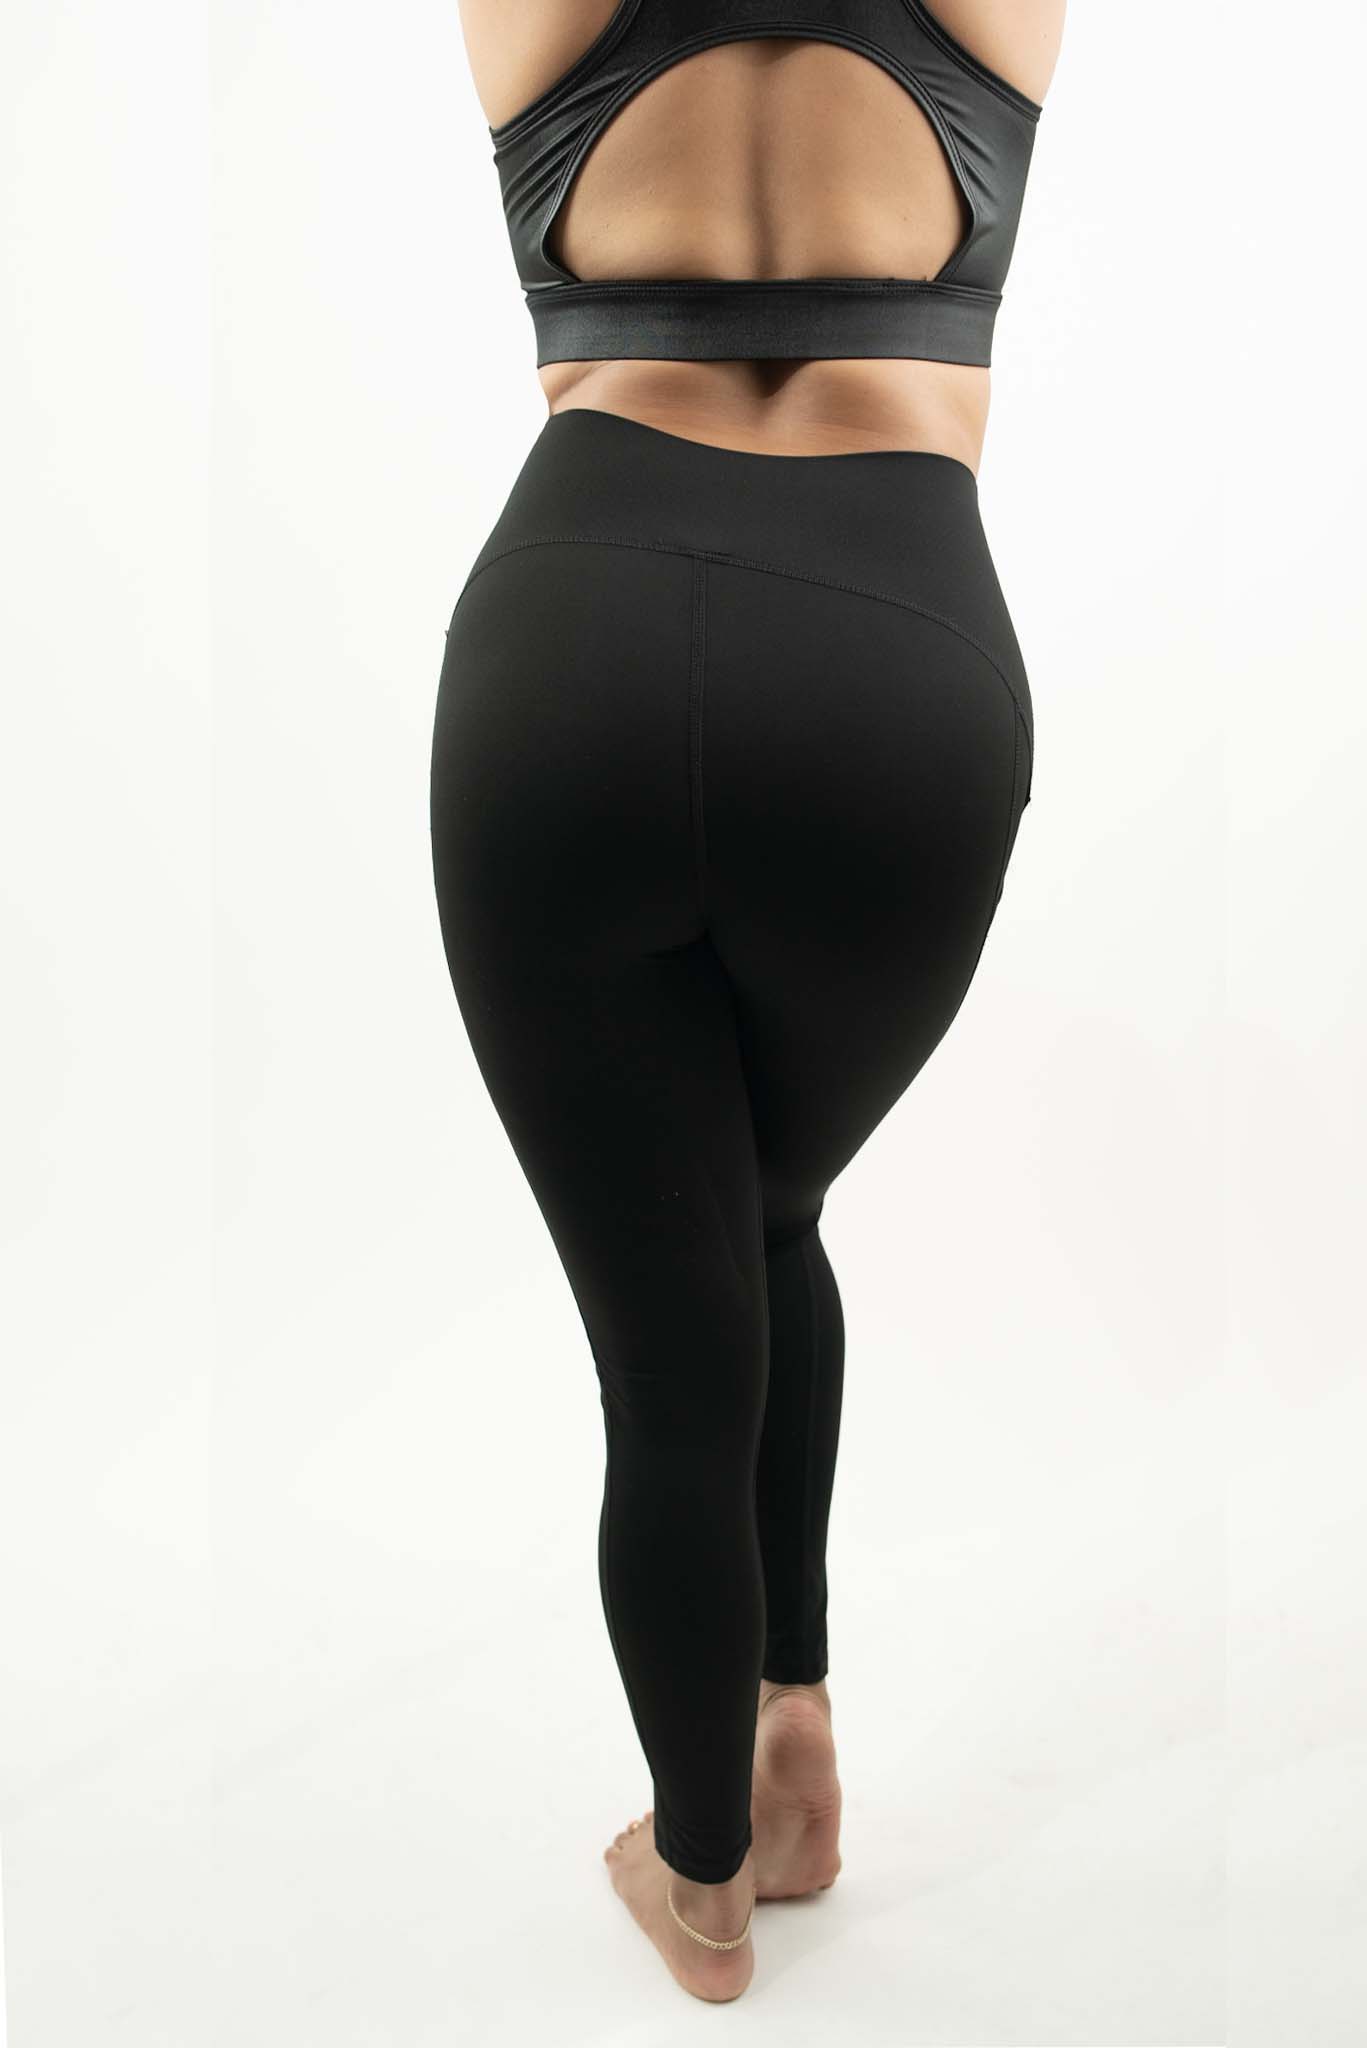  Emprella High Waist Tummy Control Athletic and Lounge Leggings  with 3 Pockets 8 Inseam (Black, Small) : Sports & Outdoors